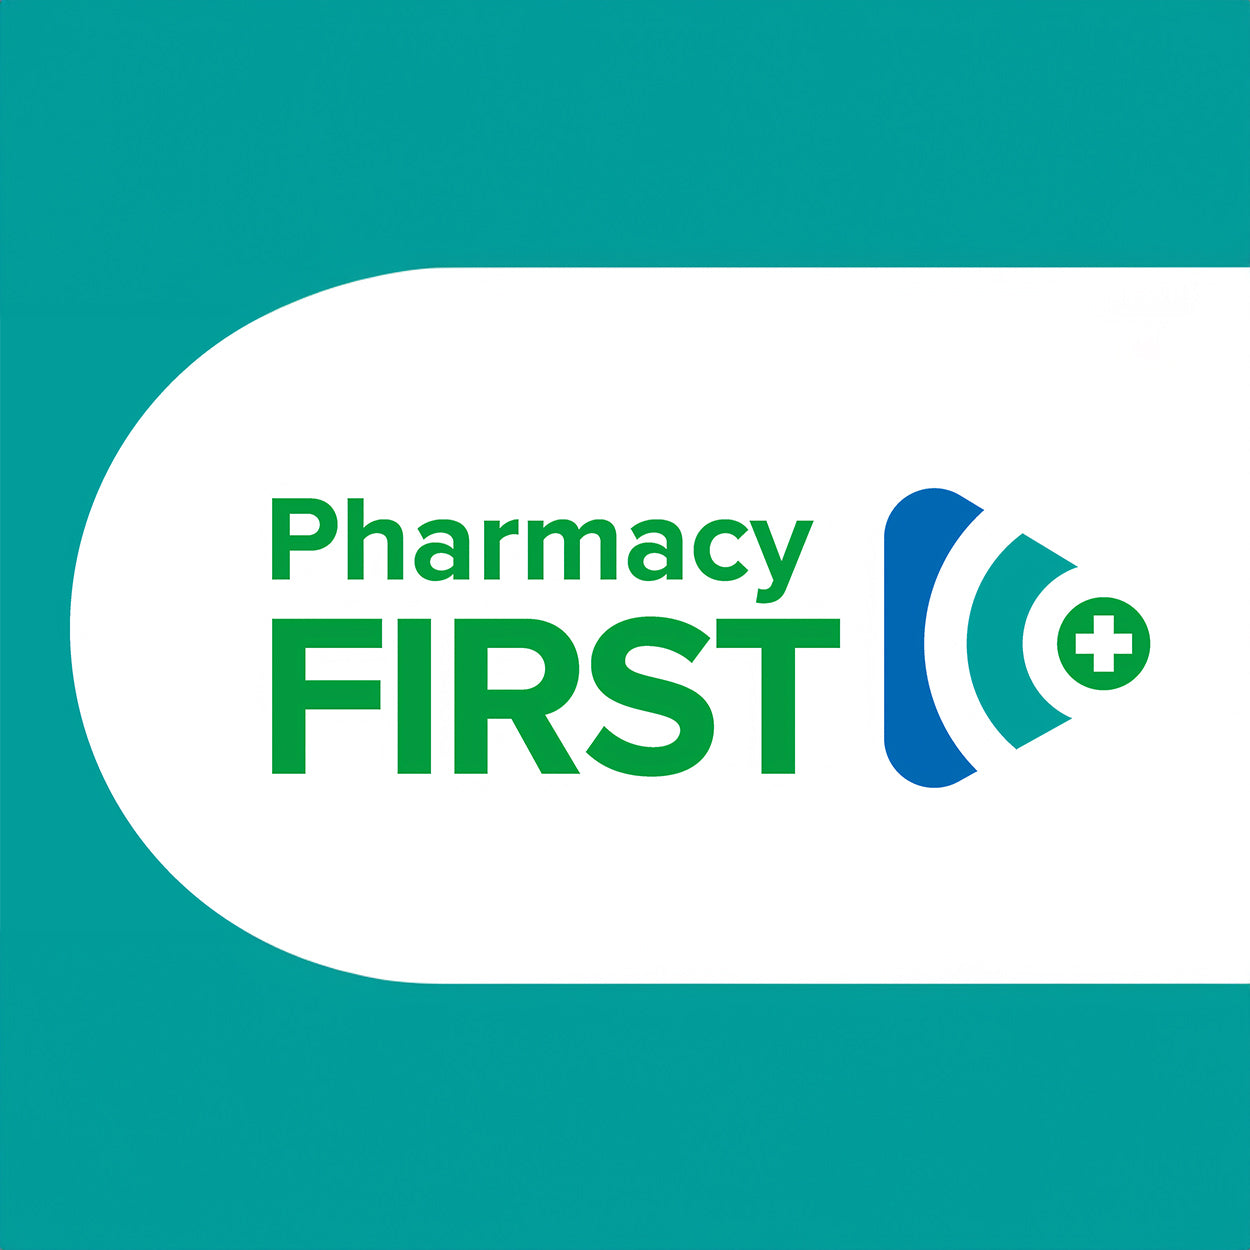 Pharmacy First Consultation